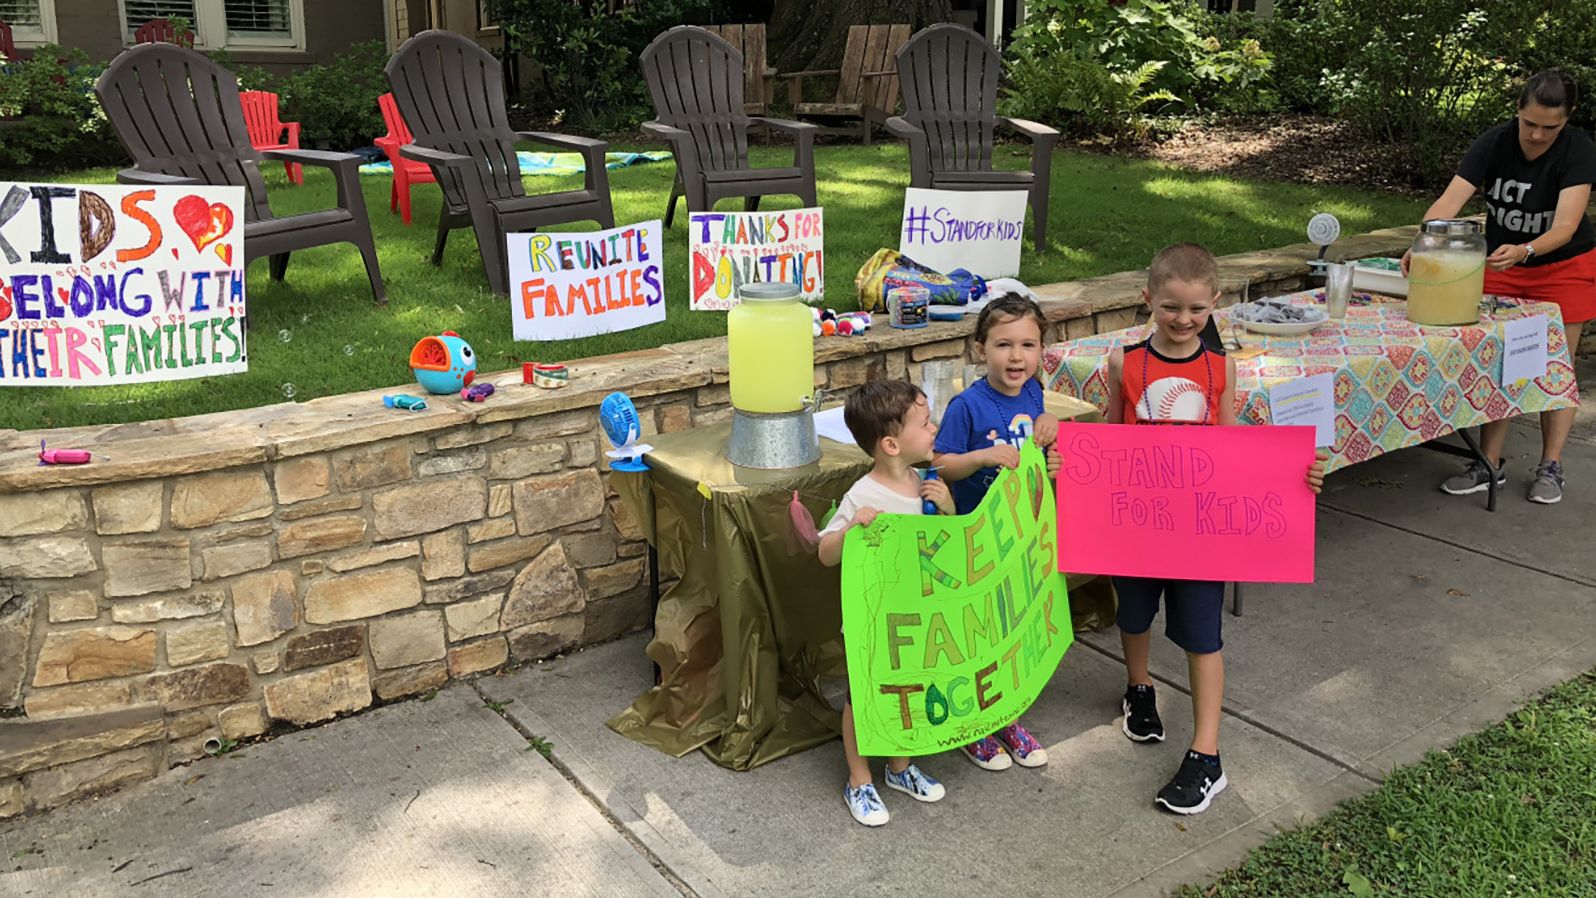 About 20 families got together to host the lemonade stand.